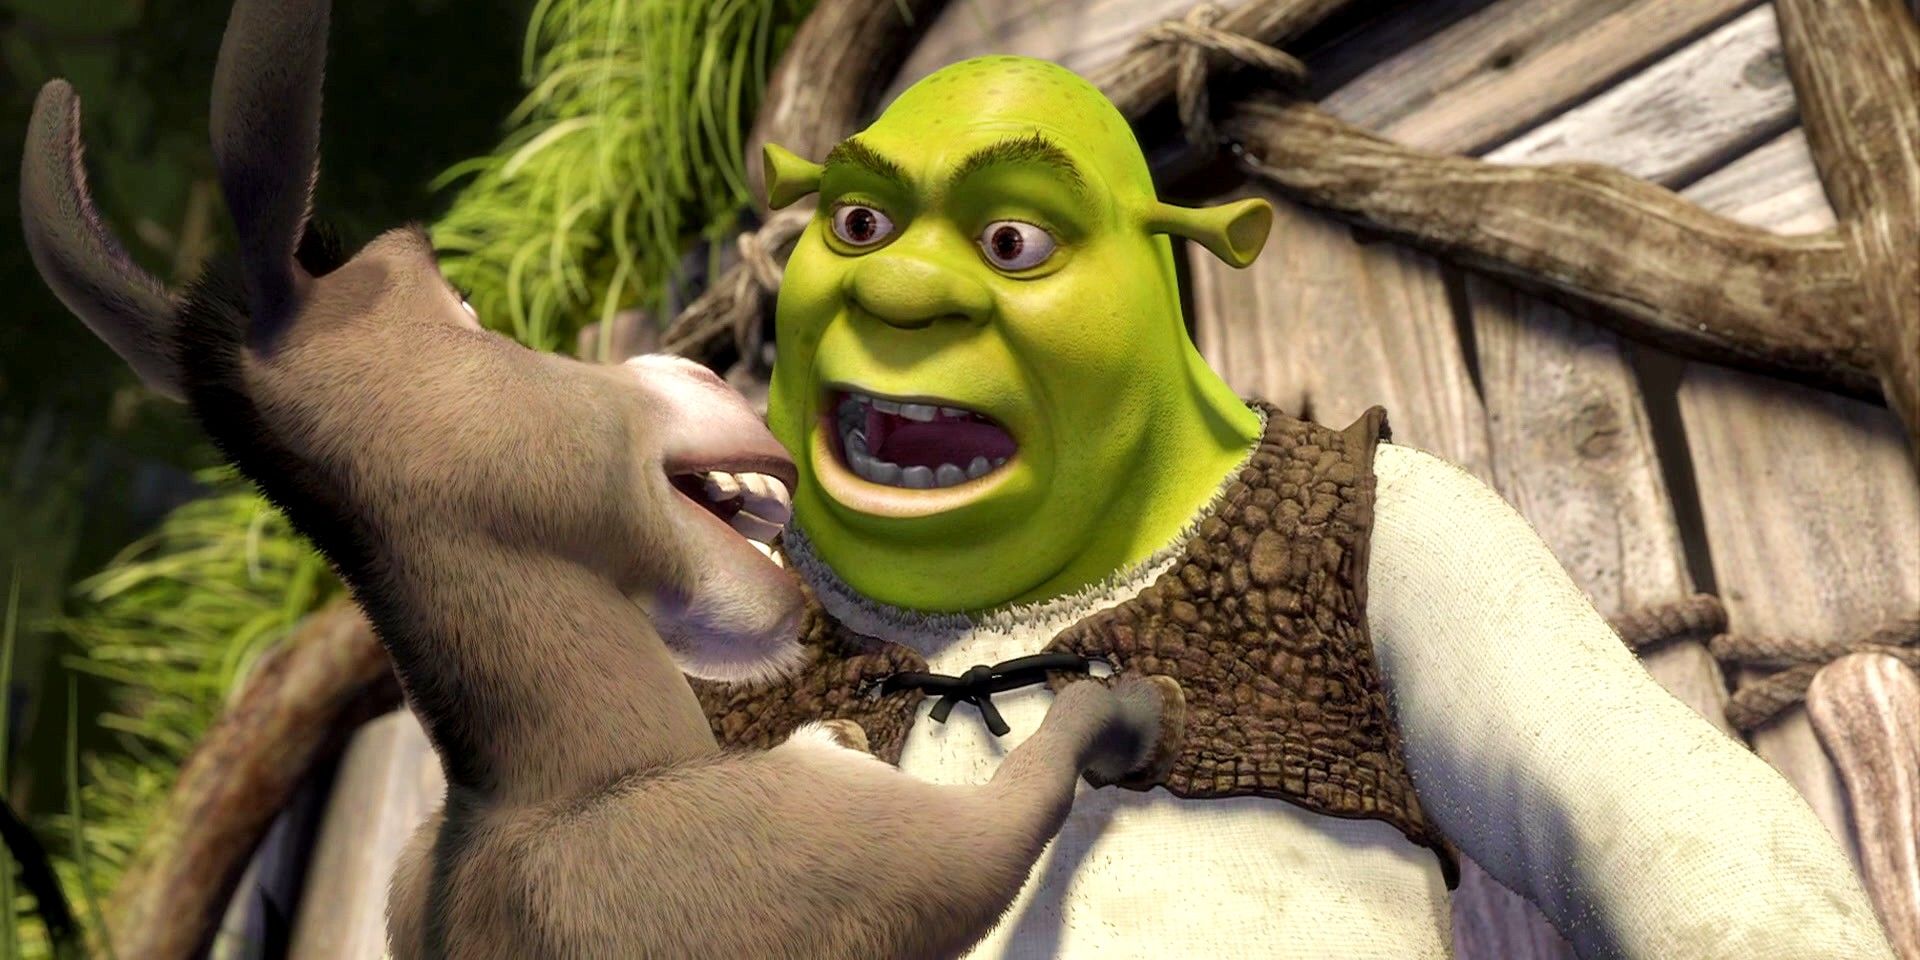 Shrek's Ogre Swamp Is Now Available To Rent On Airbnb